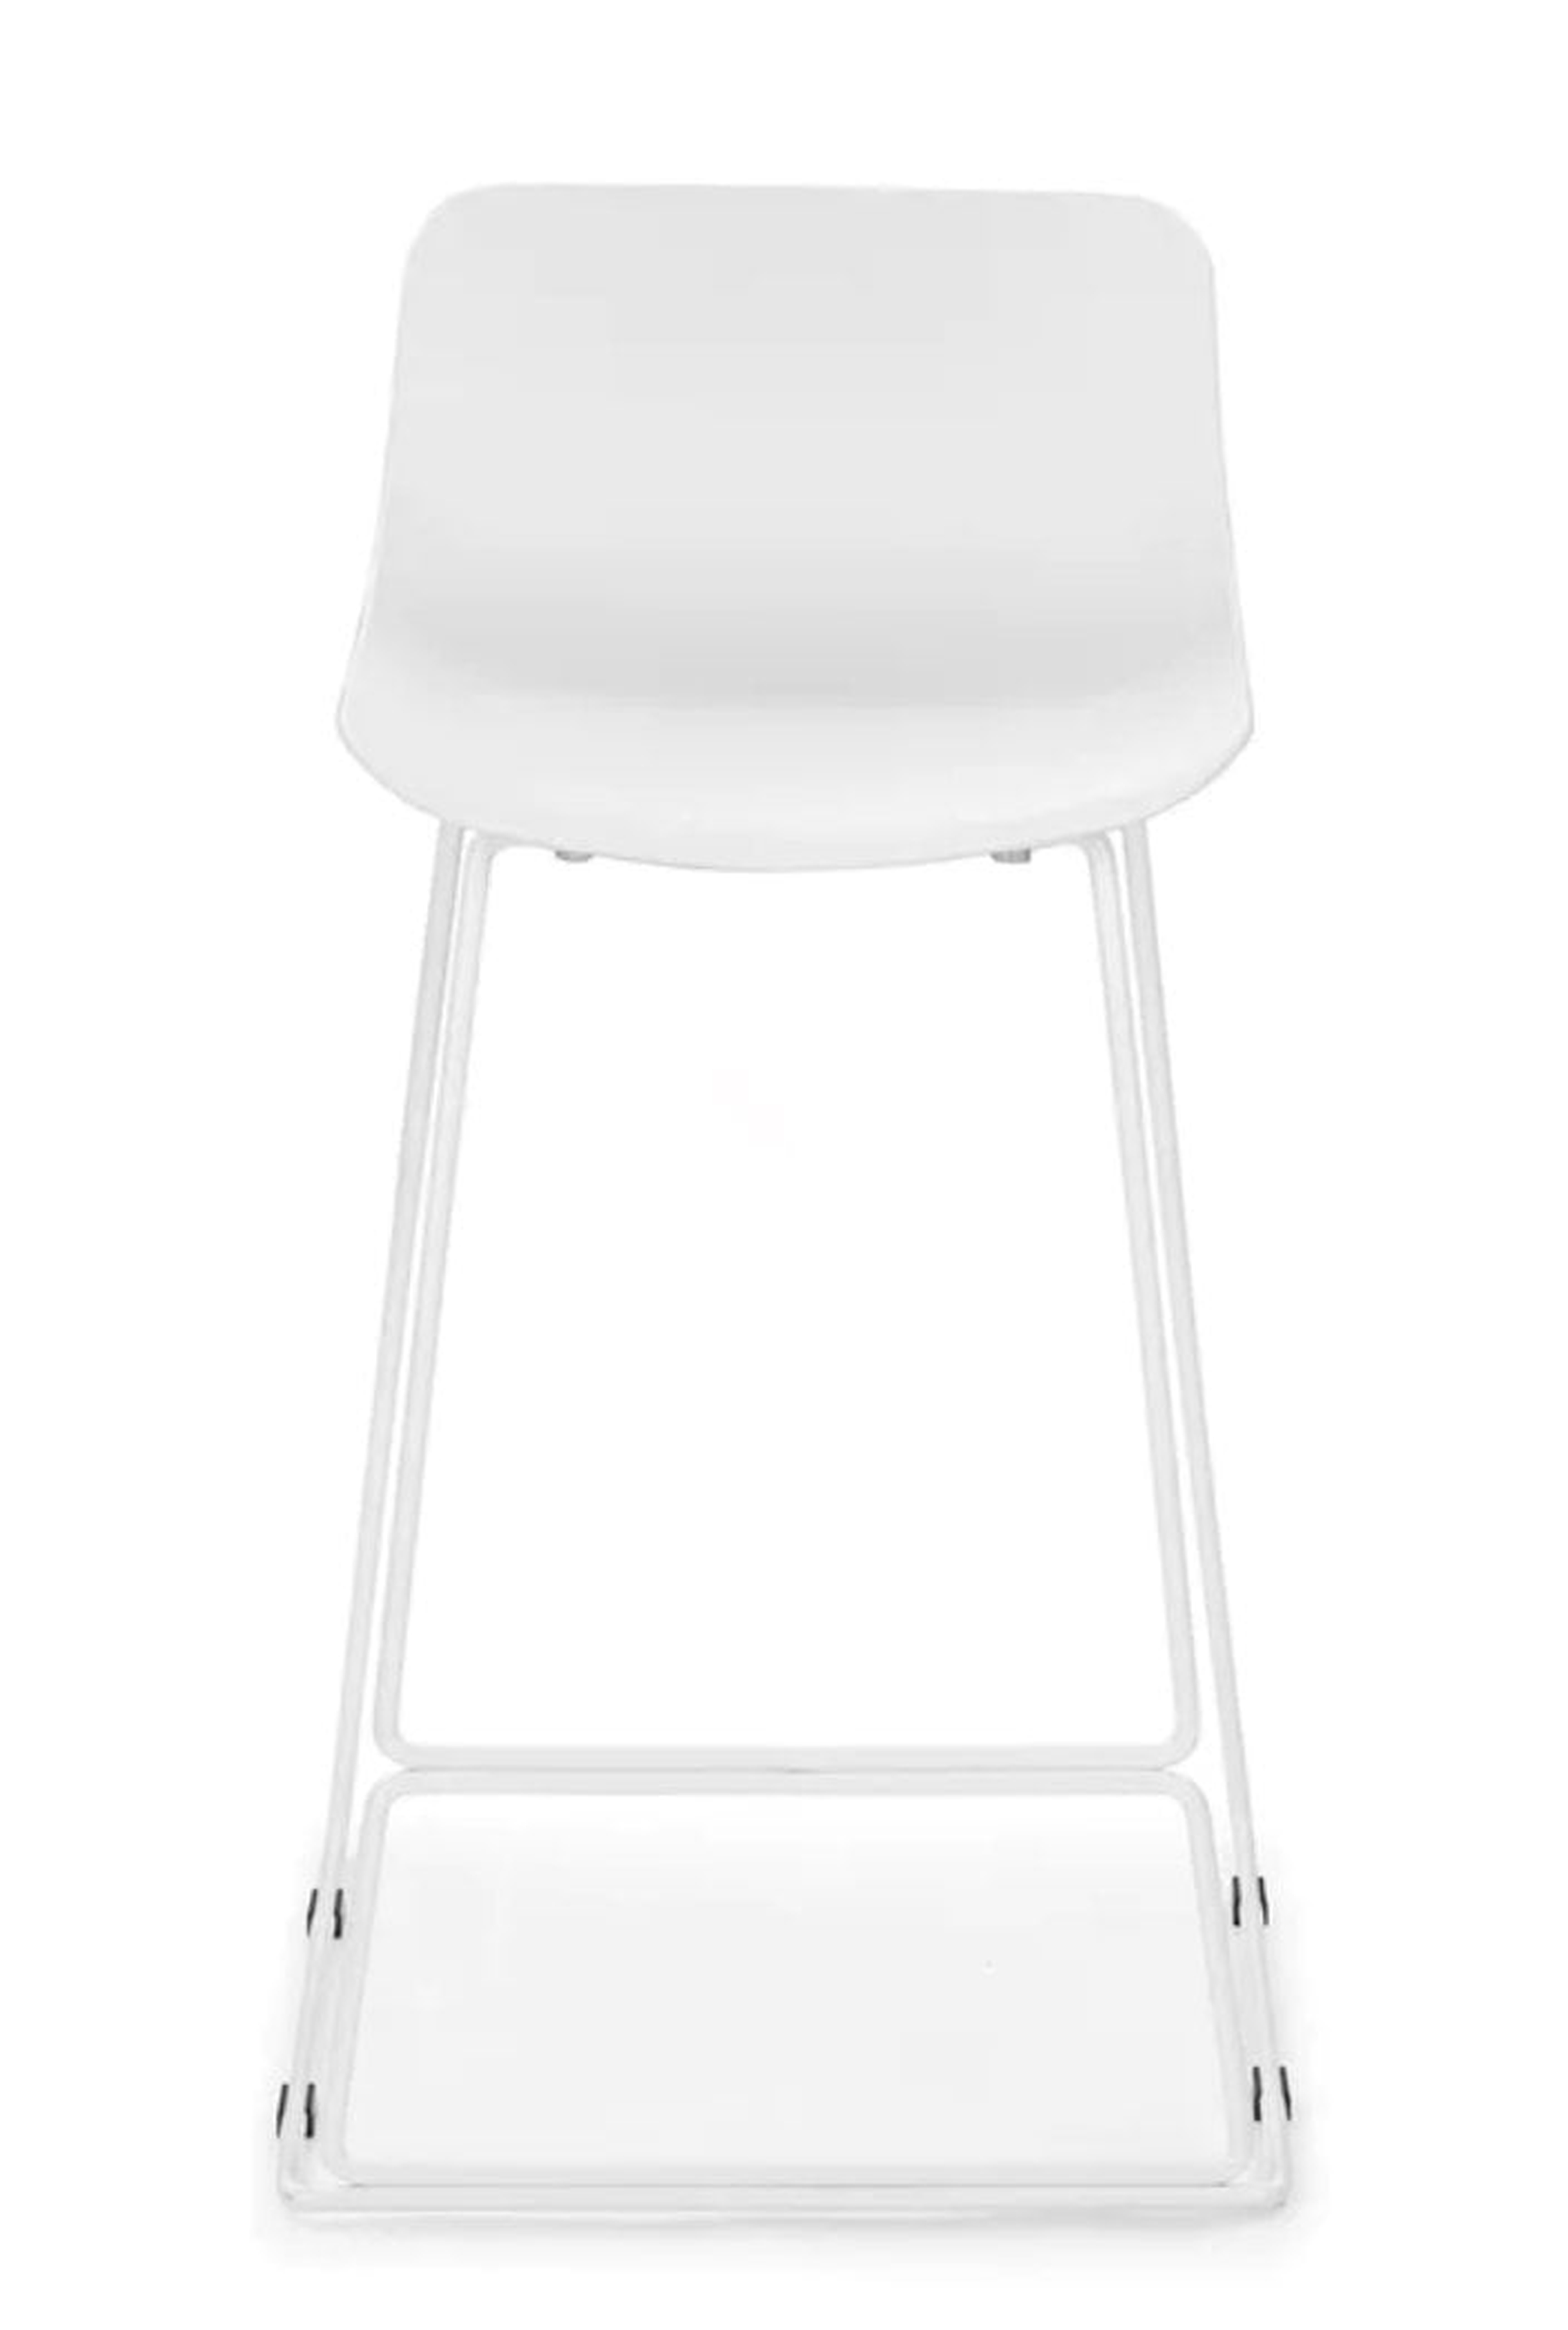 Anco White Counter Stool - Article